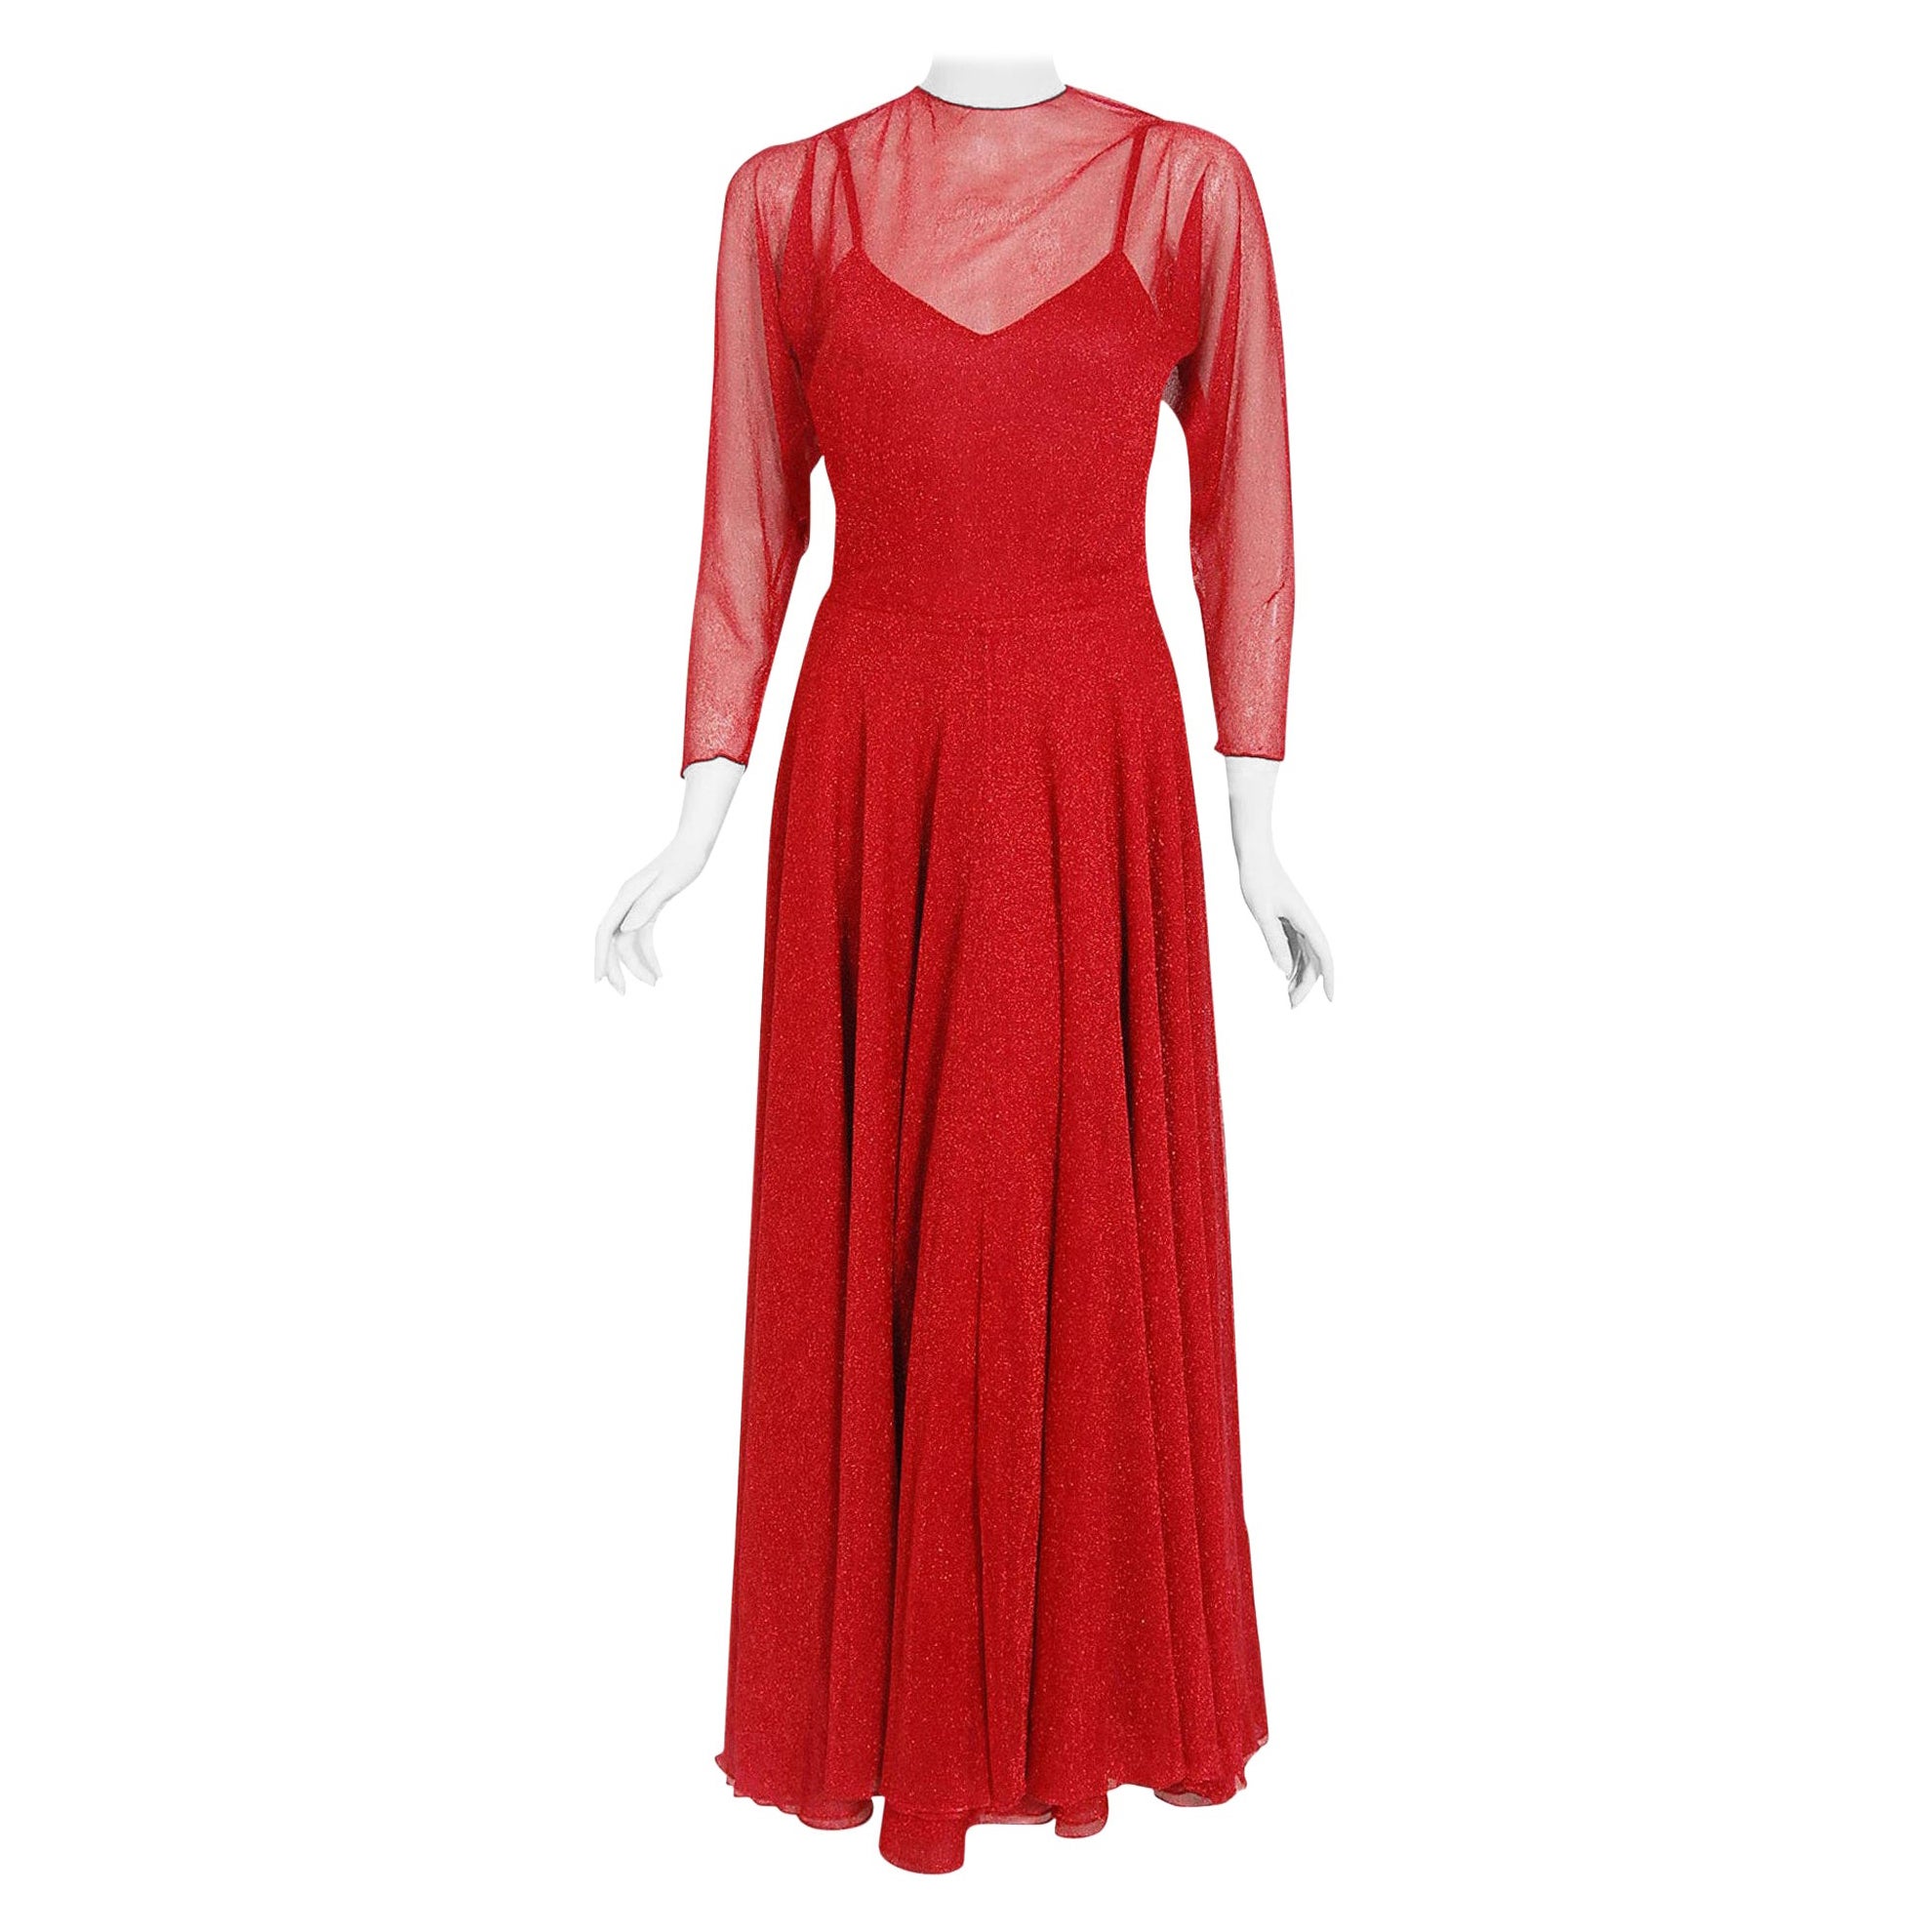 Vintage 1970's Halston Couture Red Metallic Sheer Knit Long-Sleeve Dress Gown For Sale